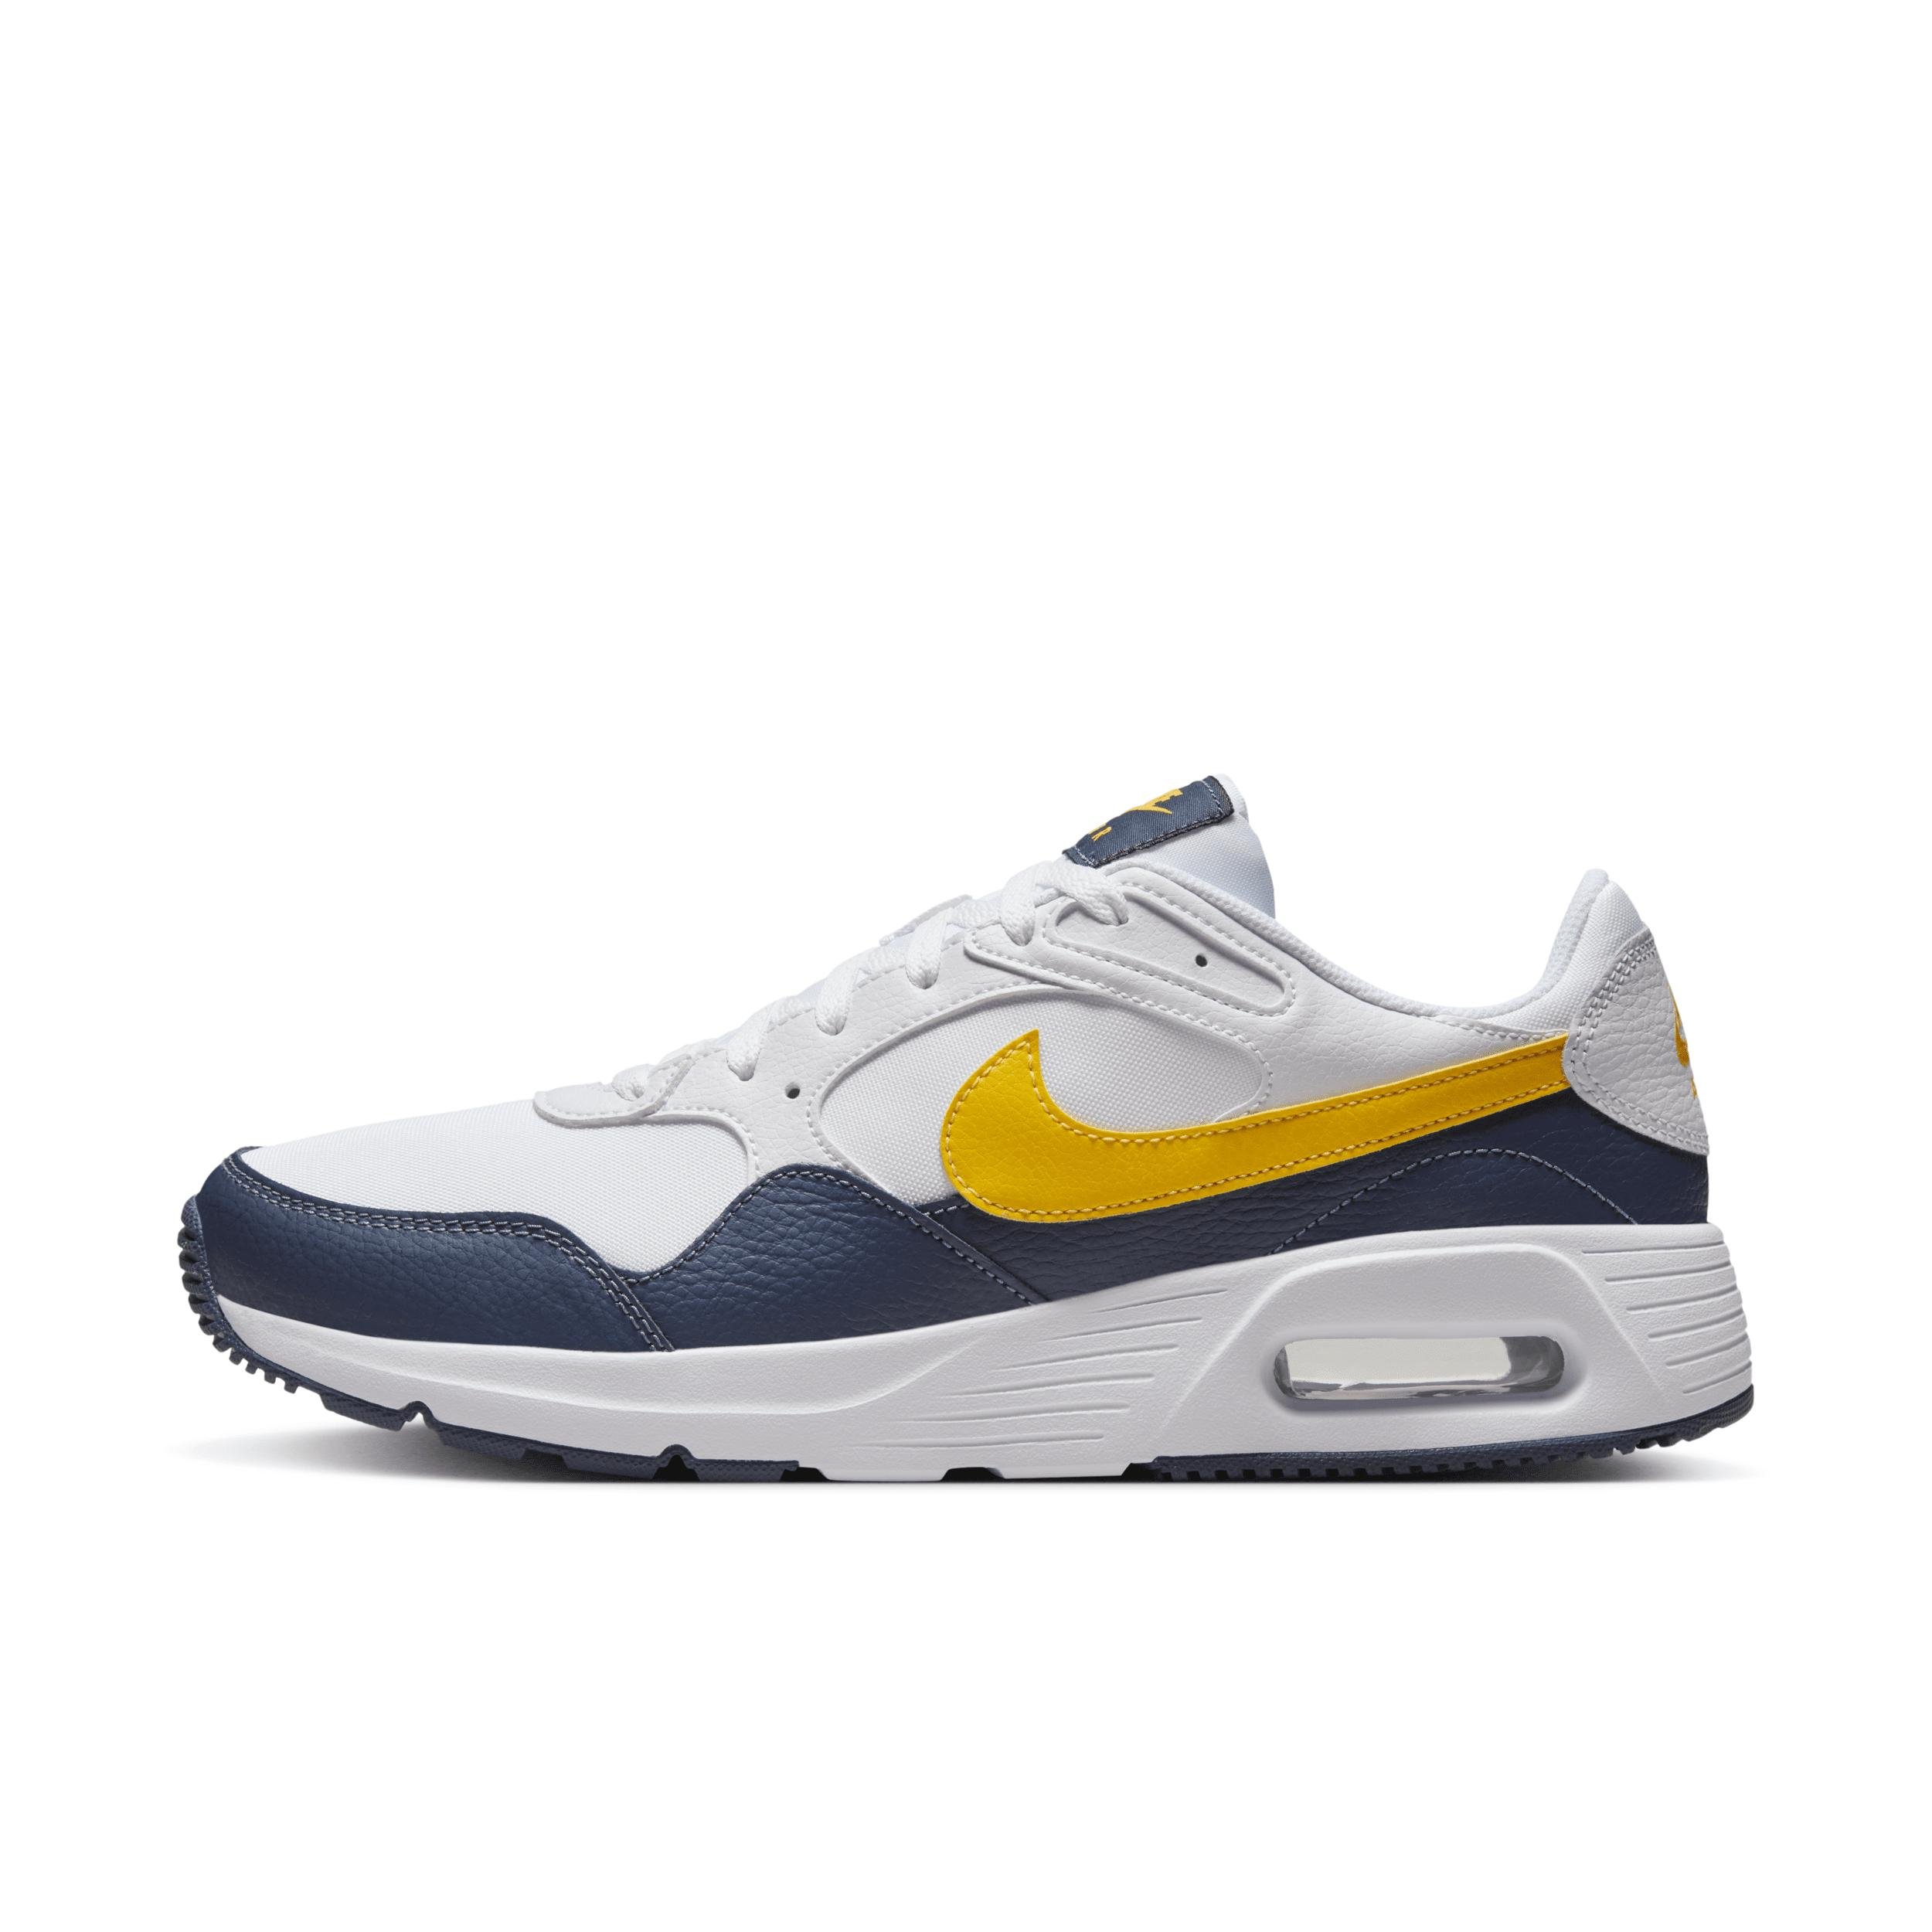 Nike Men's Air Max SC Shoes by NIKE